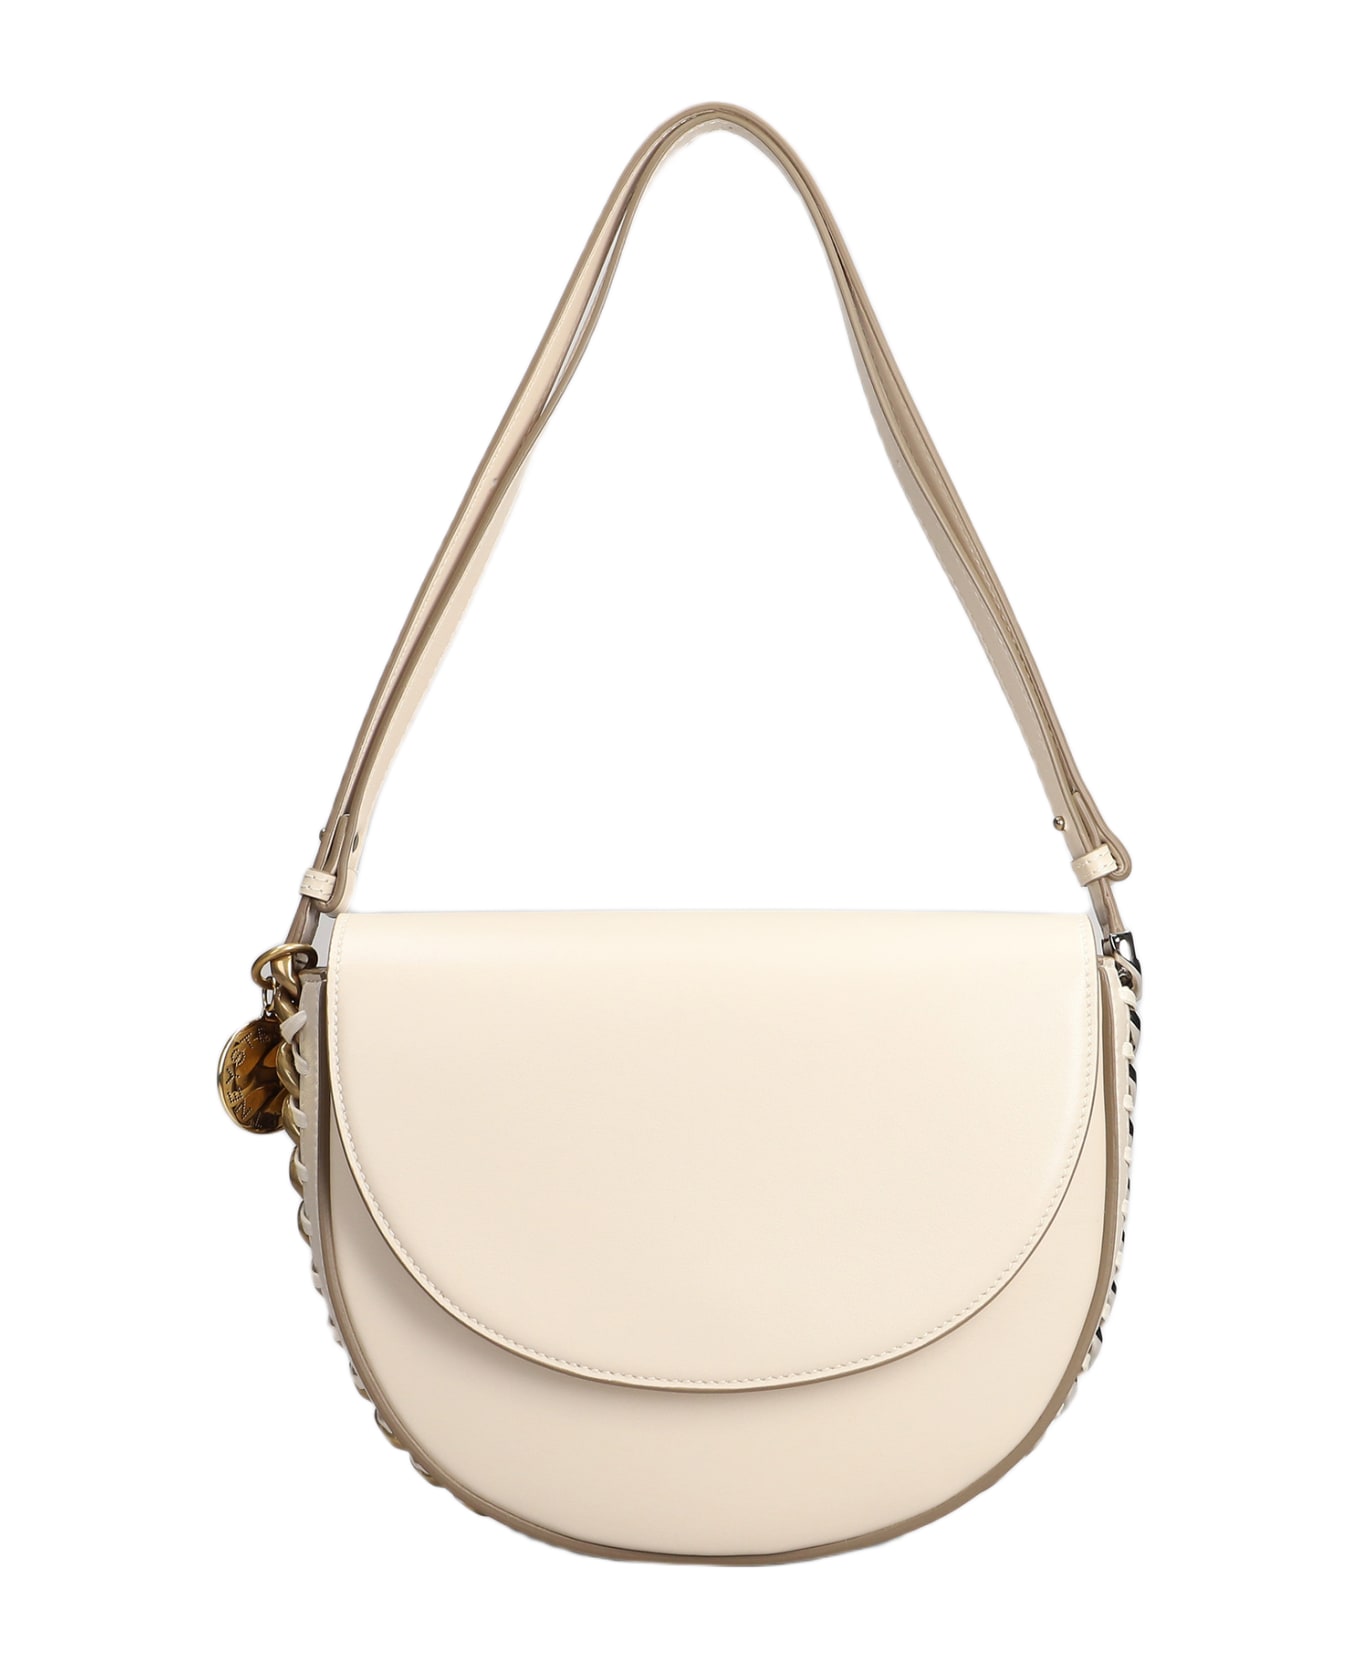 Stella McCartney Shoulder Bag In White Faux Leather - white